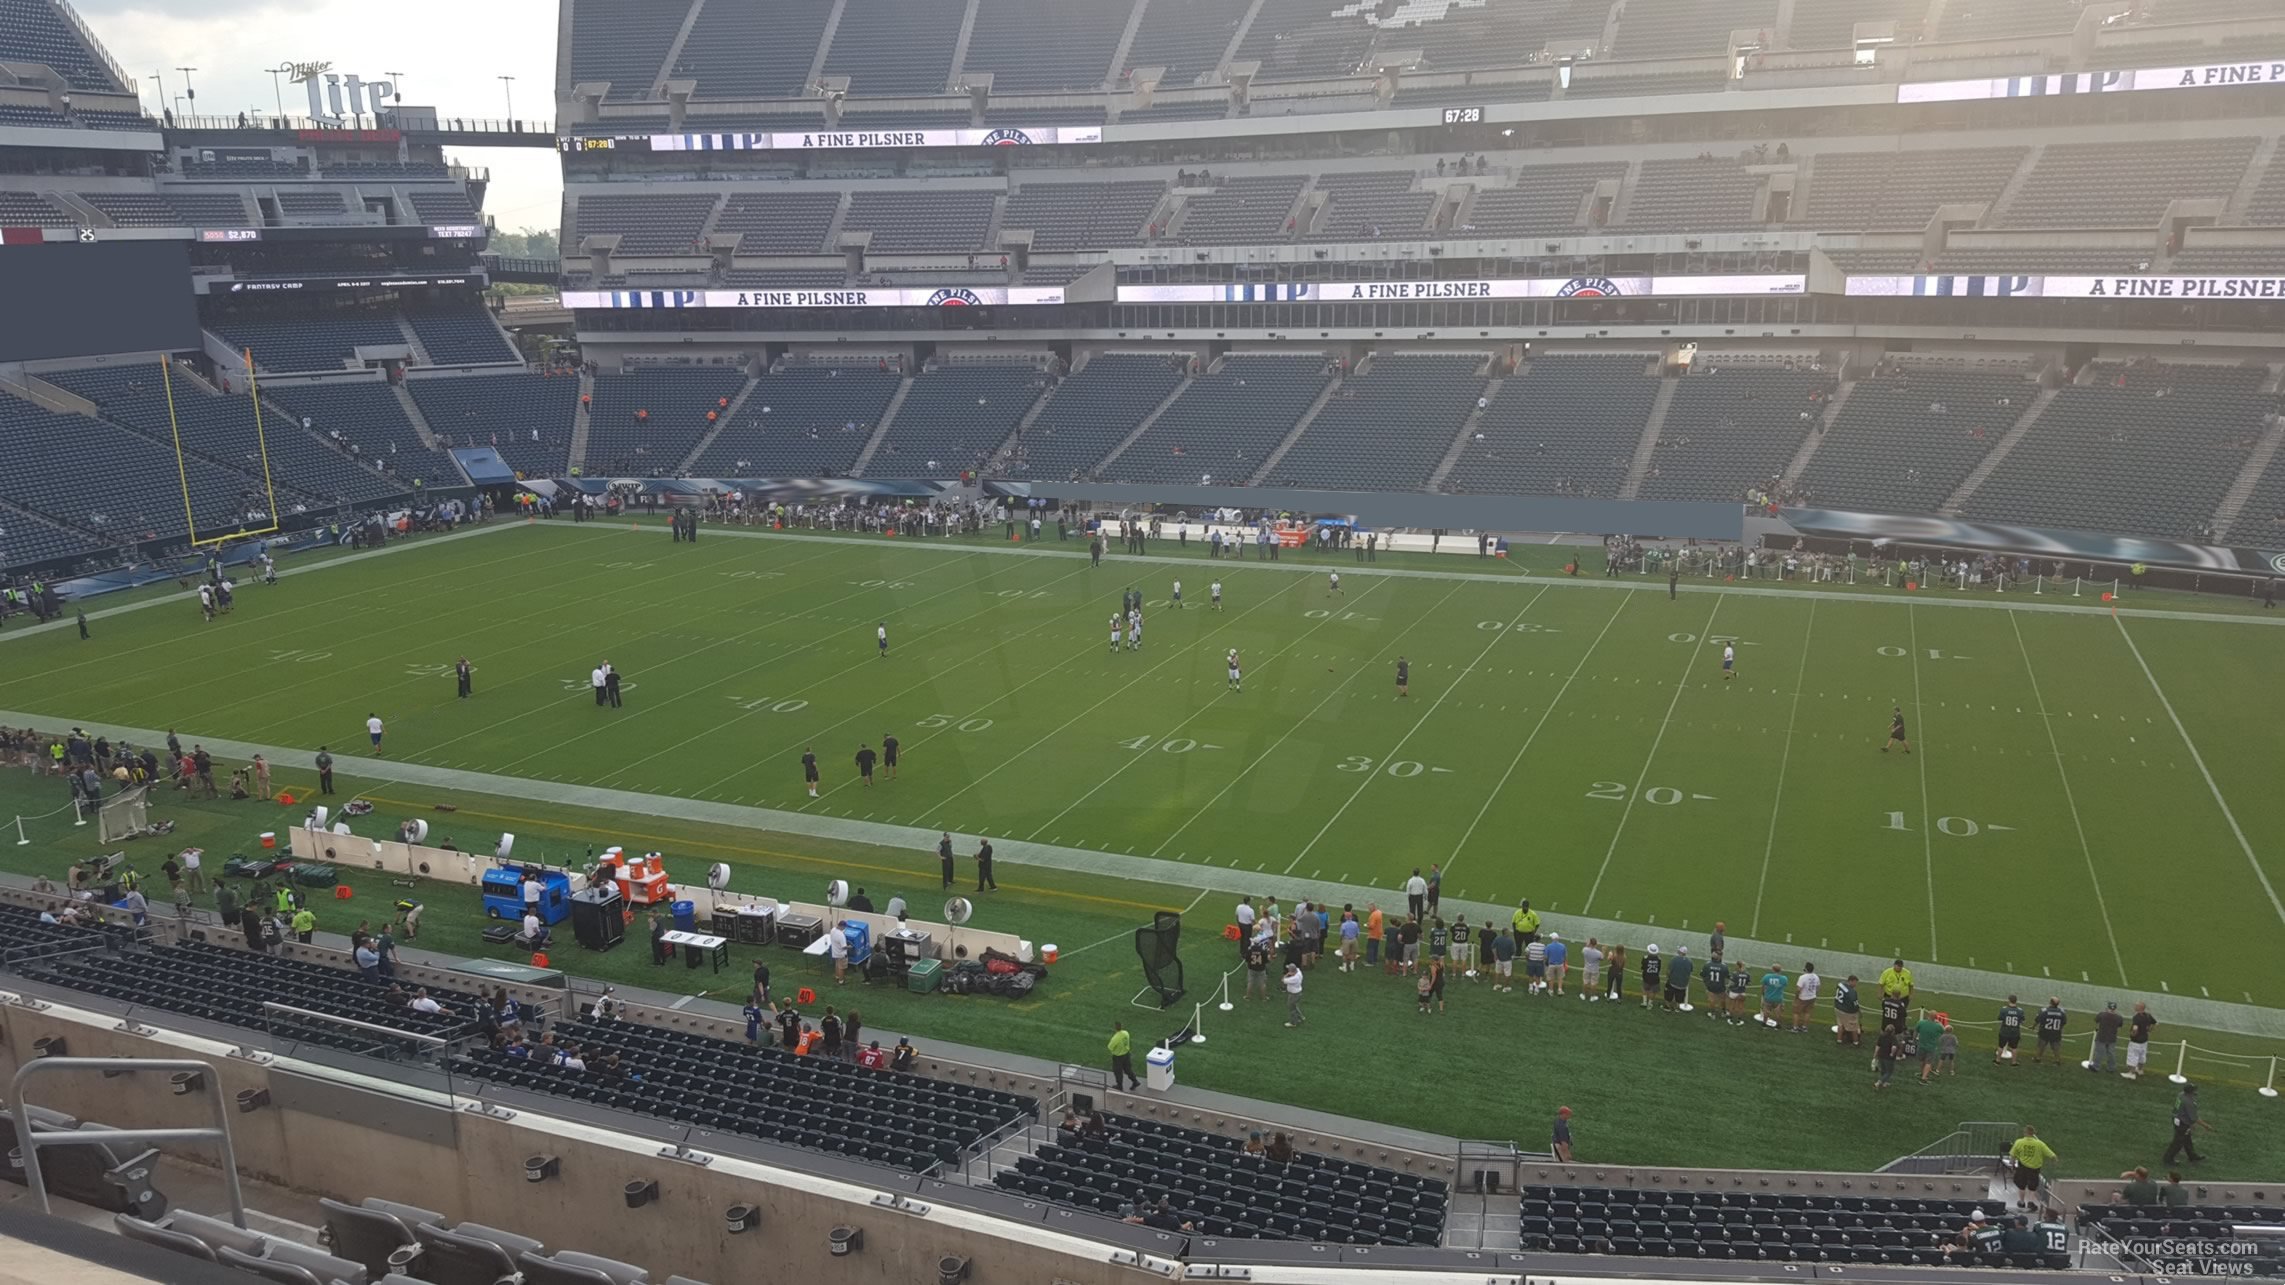 section c24, row 7 seat view  for football - lincoln financial field